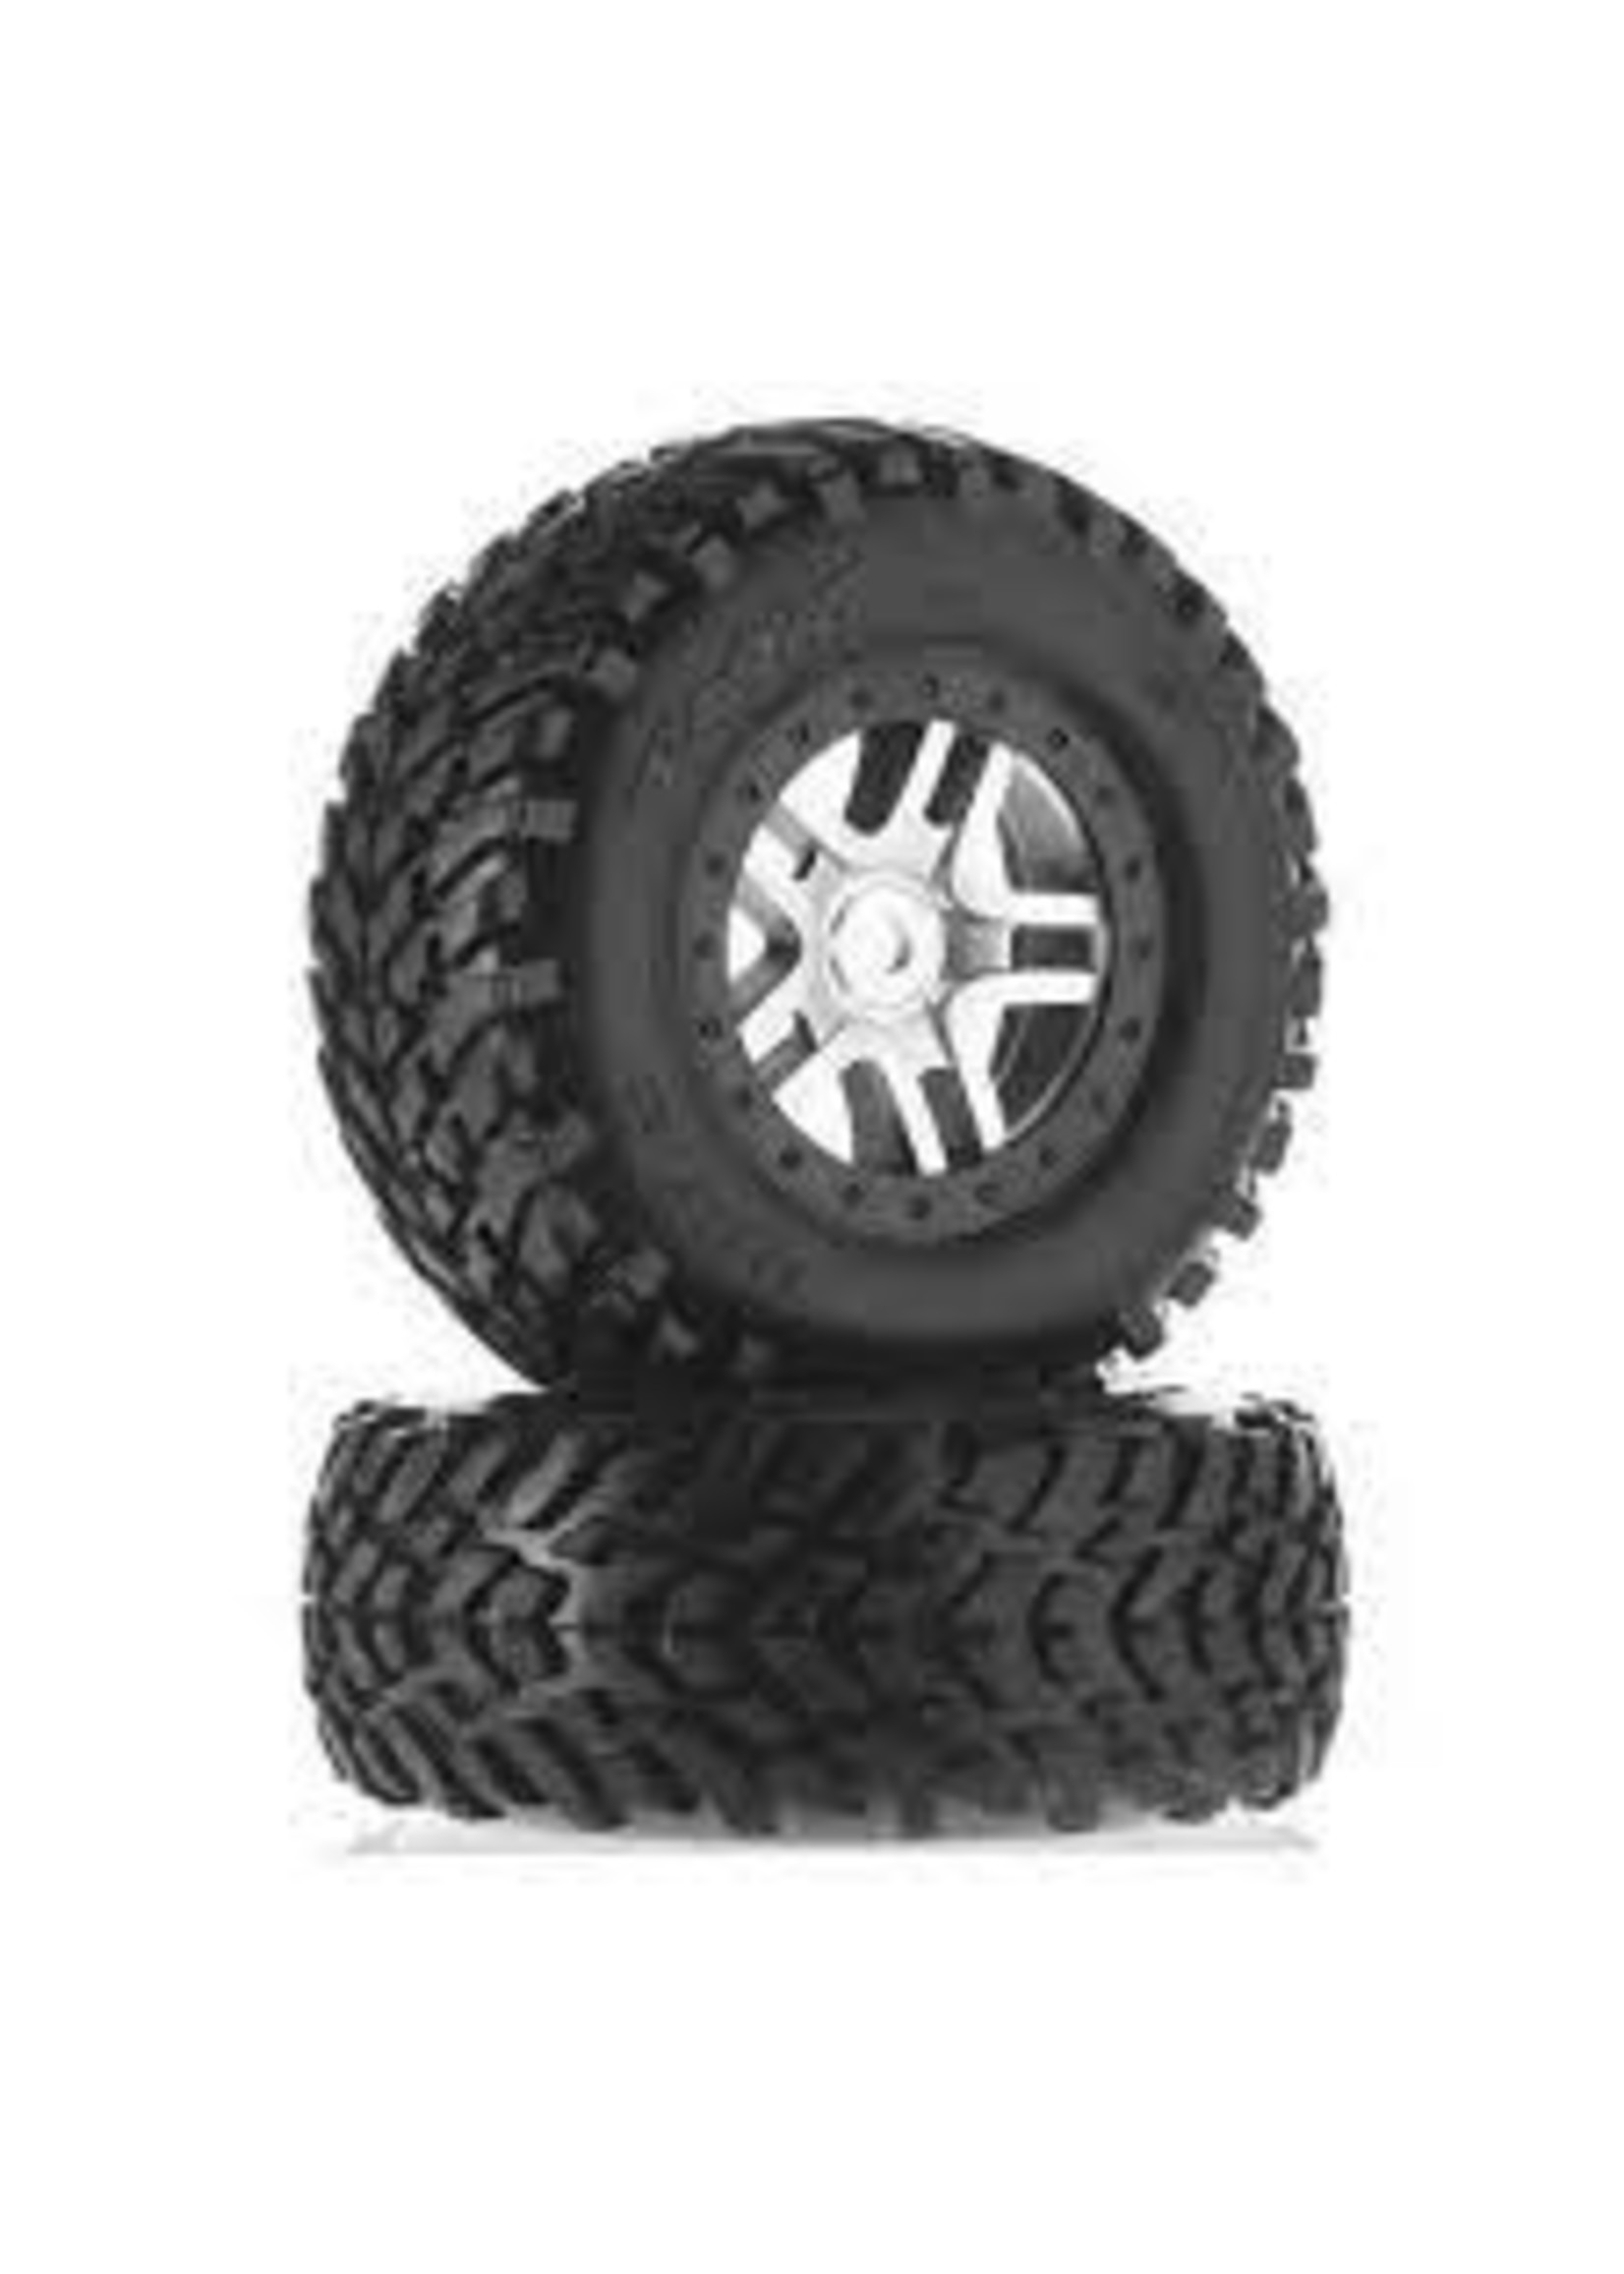 Traxxas 5975X Tires & wheels, assembled, glued (S1 compound) (SCT Split-Spoke satin chrome, black beadlock style wheels, dual profile (2.2' outer, 3.0' inner), SCT off-road racing tires, foam inserts) (2) (front/rear)